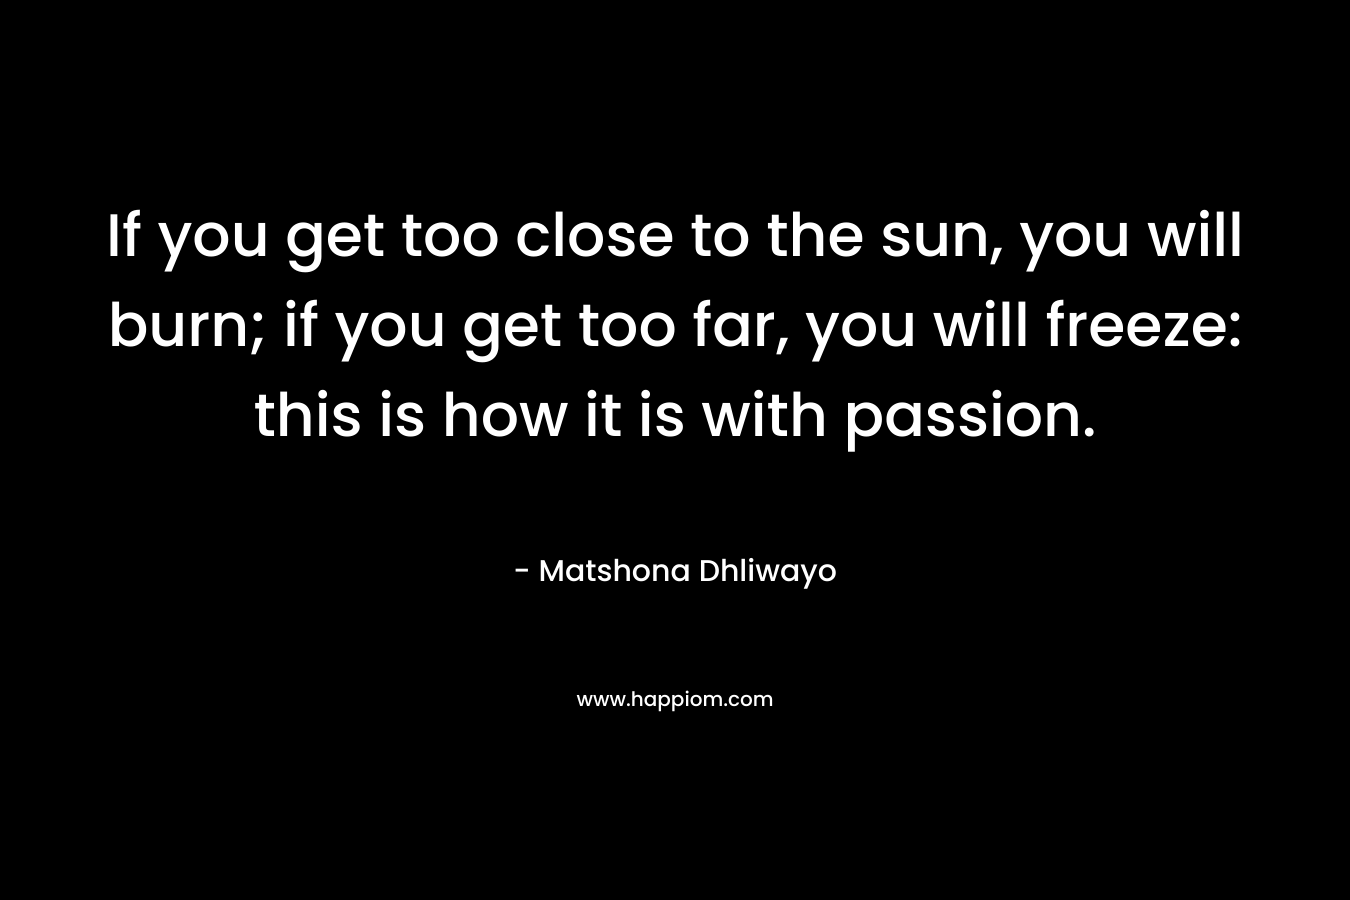 If you get too close to the sun, you will burn; if you get too far, you will freeze: this is how it is with passion. – Matshona Dhliwayo